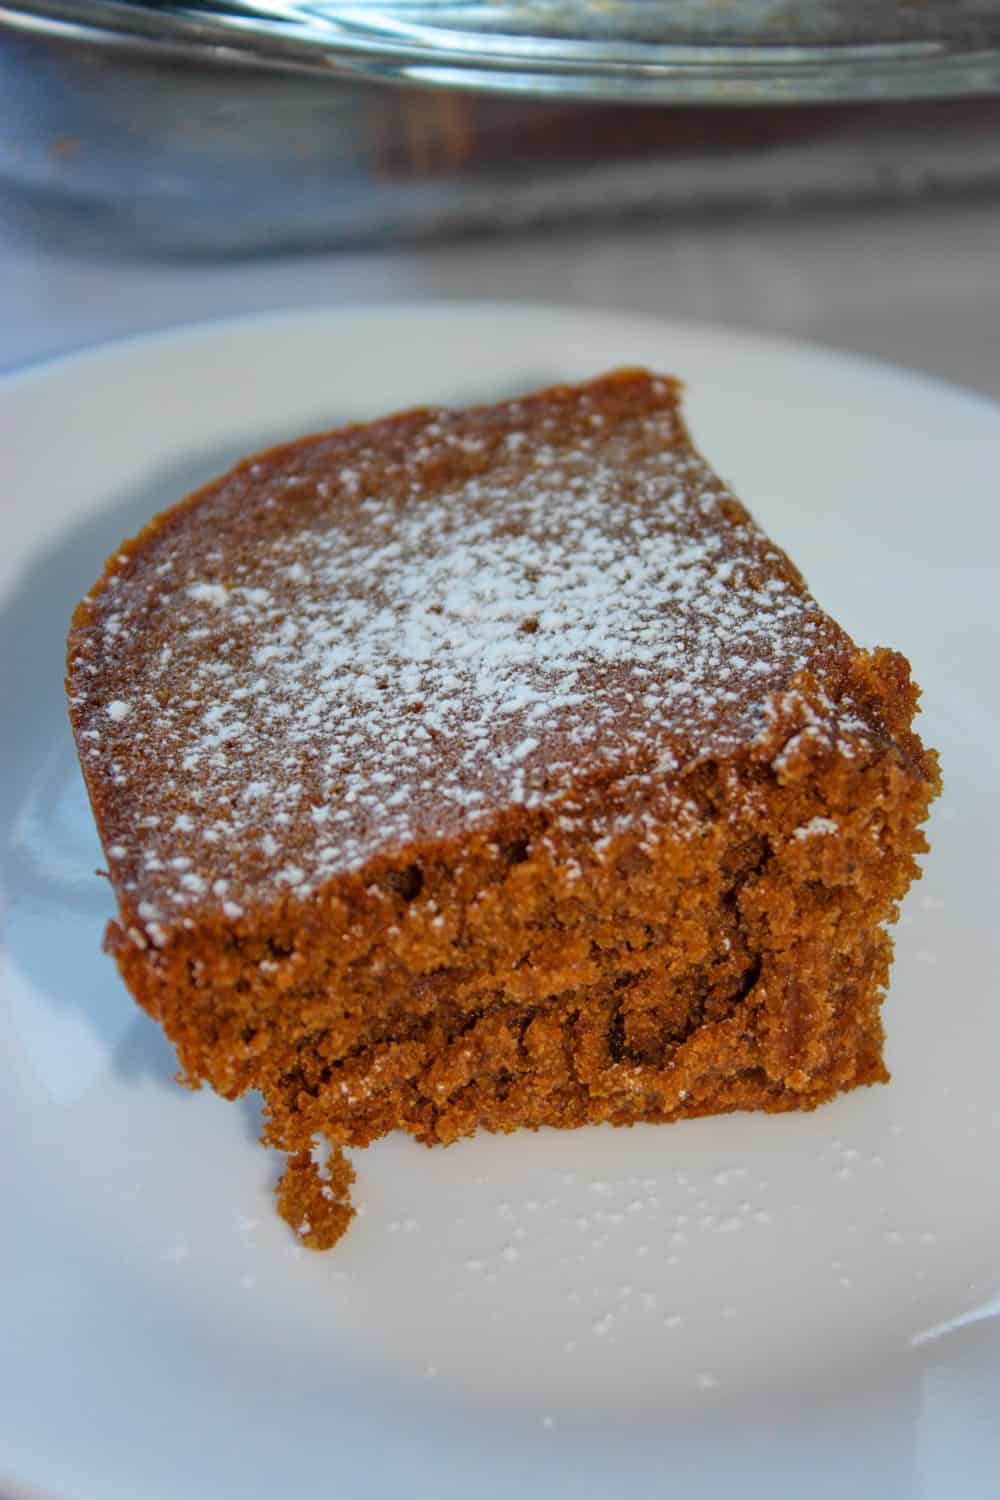 This gluten free Gingerbread Cake will be the beginning of a new tradition at holiday meals!  I was so impressed with this moist, richly flavoured cake.  